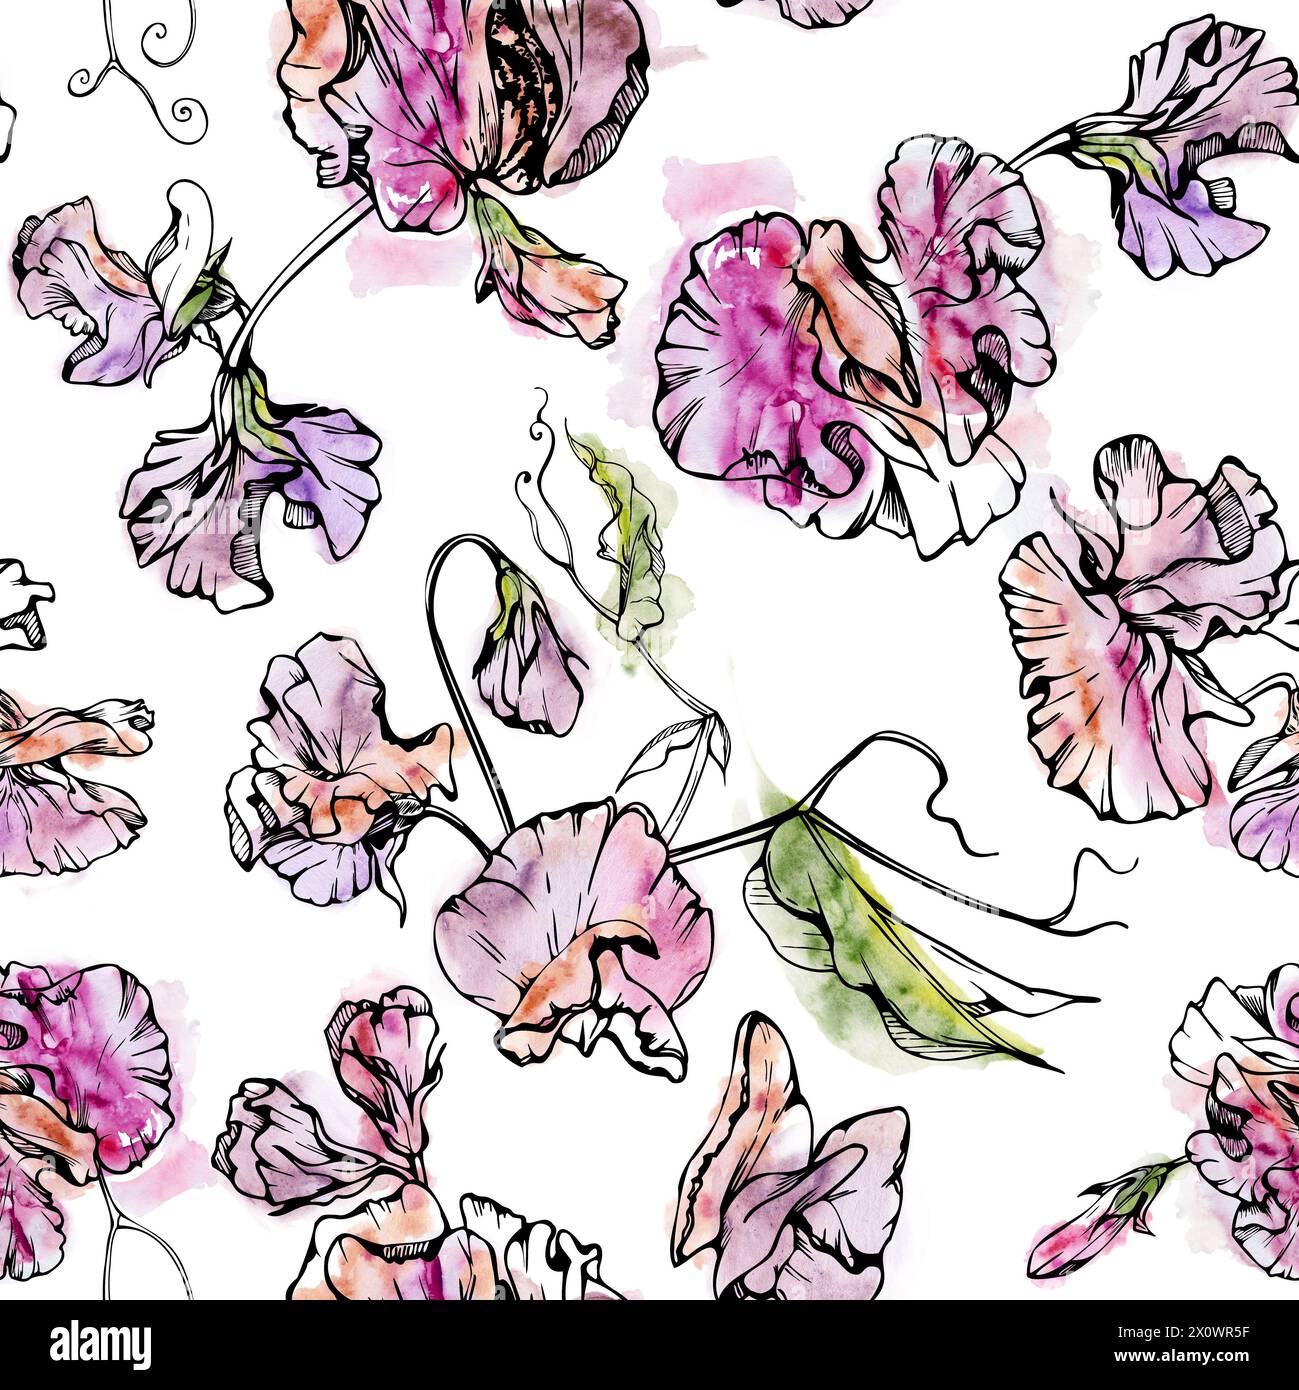 Hand drawn watercolor ink illustration botanical flowers leaves. Sweet everlasting pea, vetch bindweed legume tendrils. Seamless pattern isolated Stock Photo